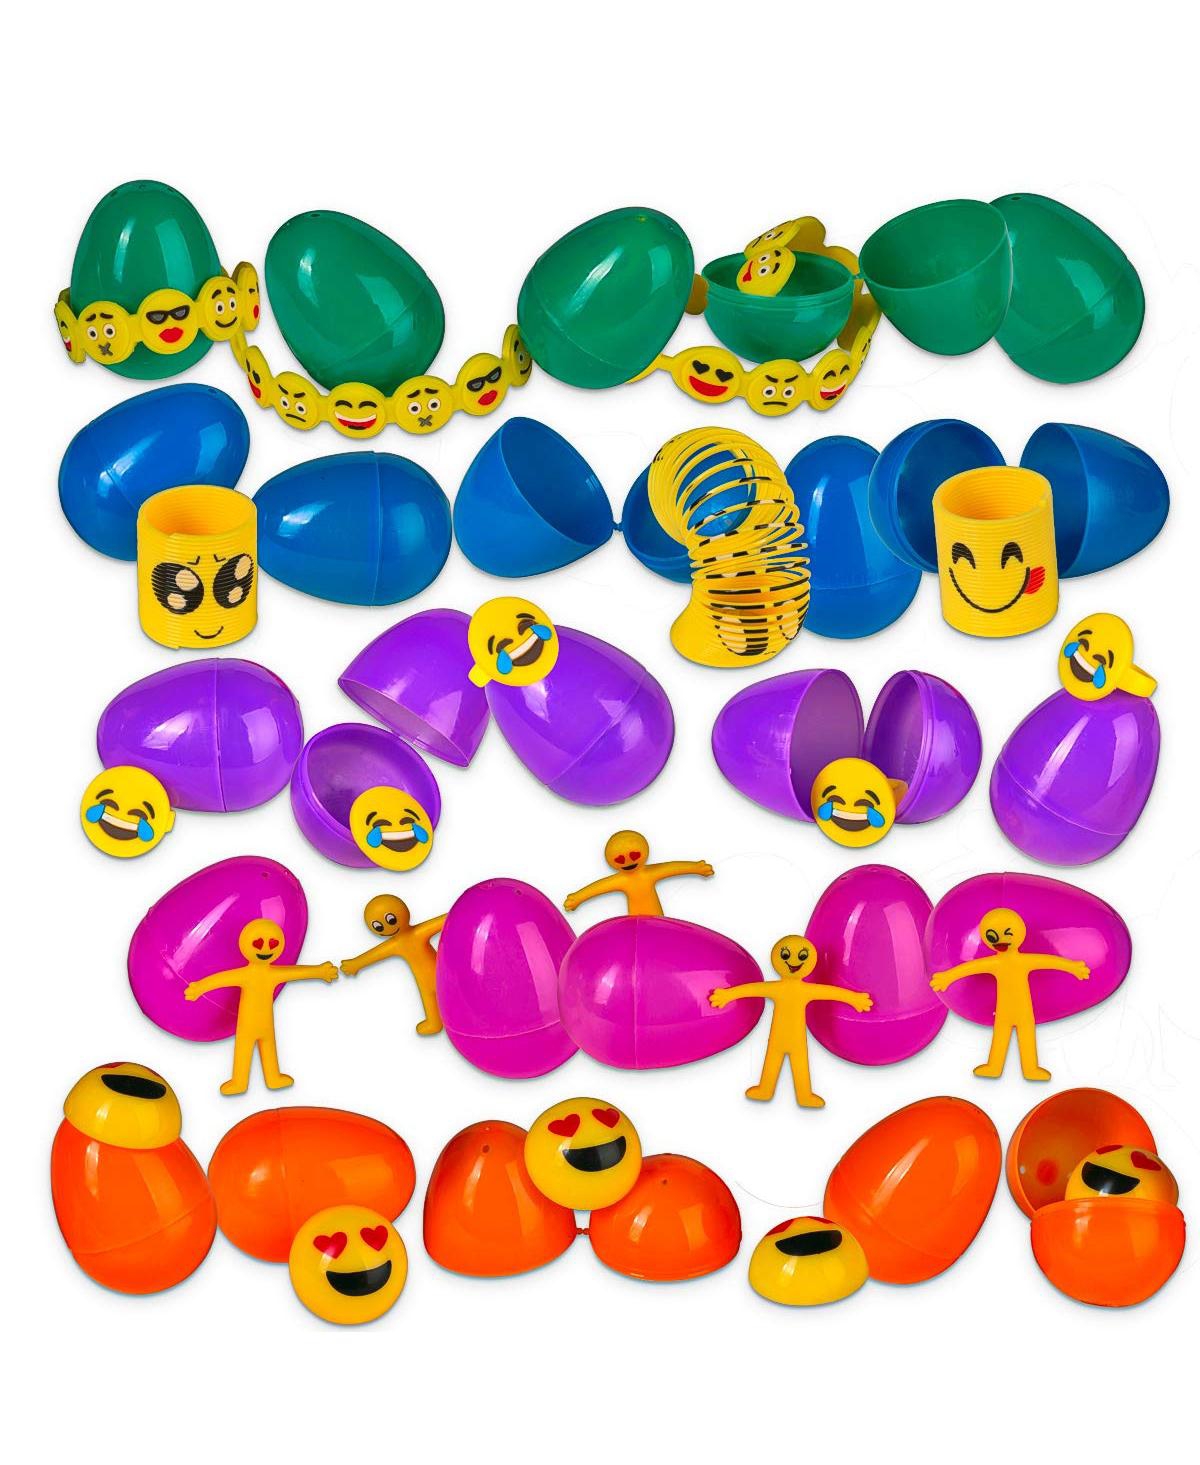 Neliblu Emoji Toy Filled Favor Eggs - 30 Bright and Colorful 2.5" Surprise Eggs with Emoji Halloween Toys - Multicolor